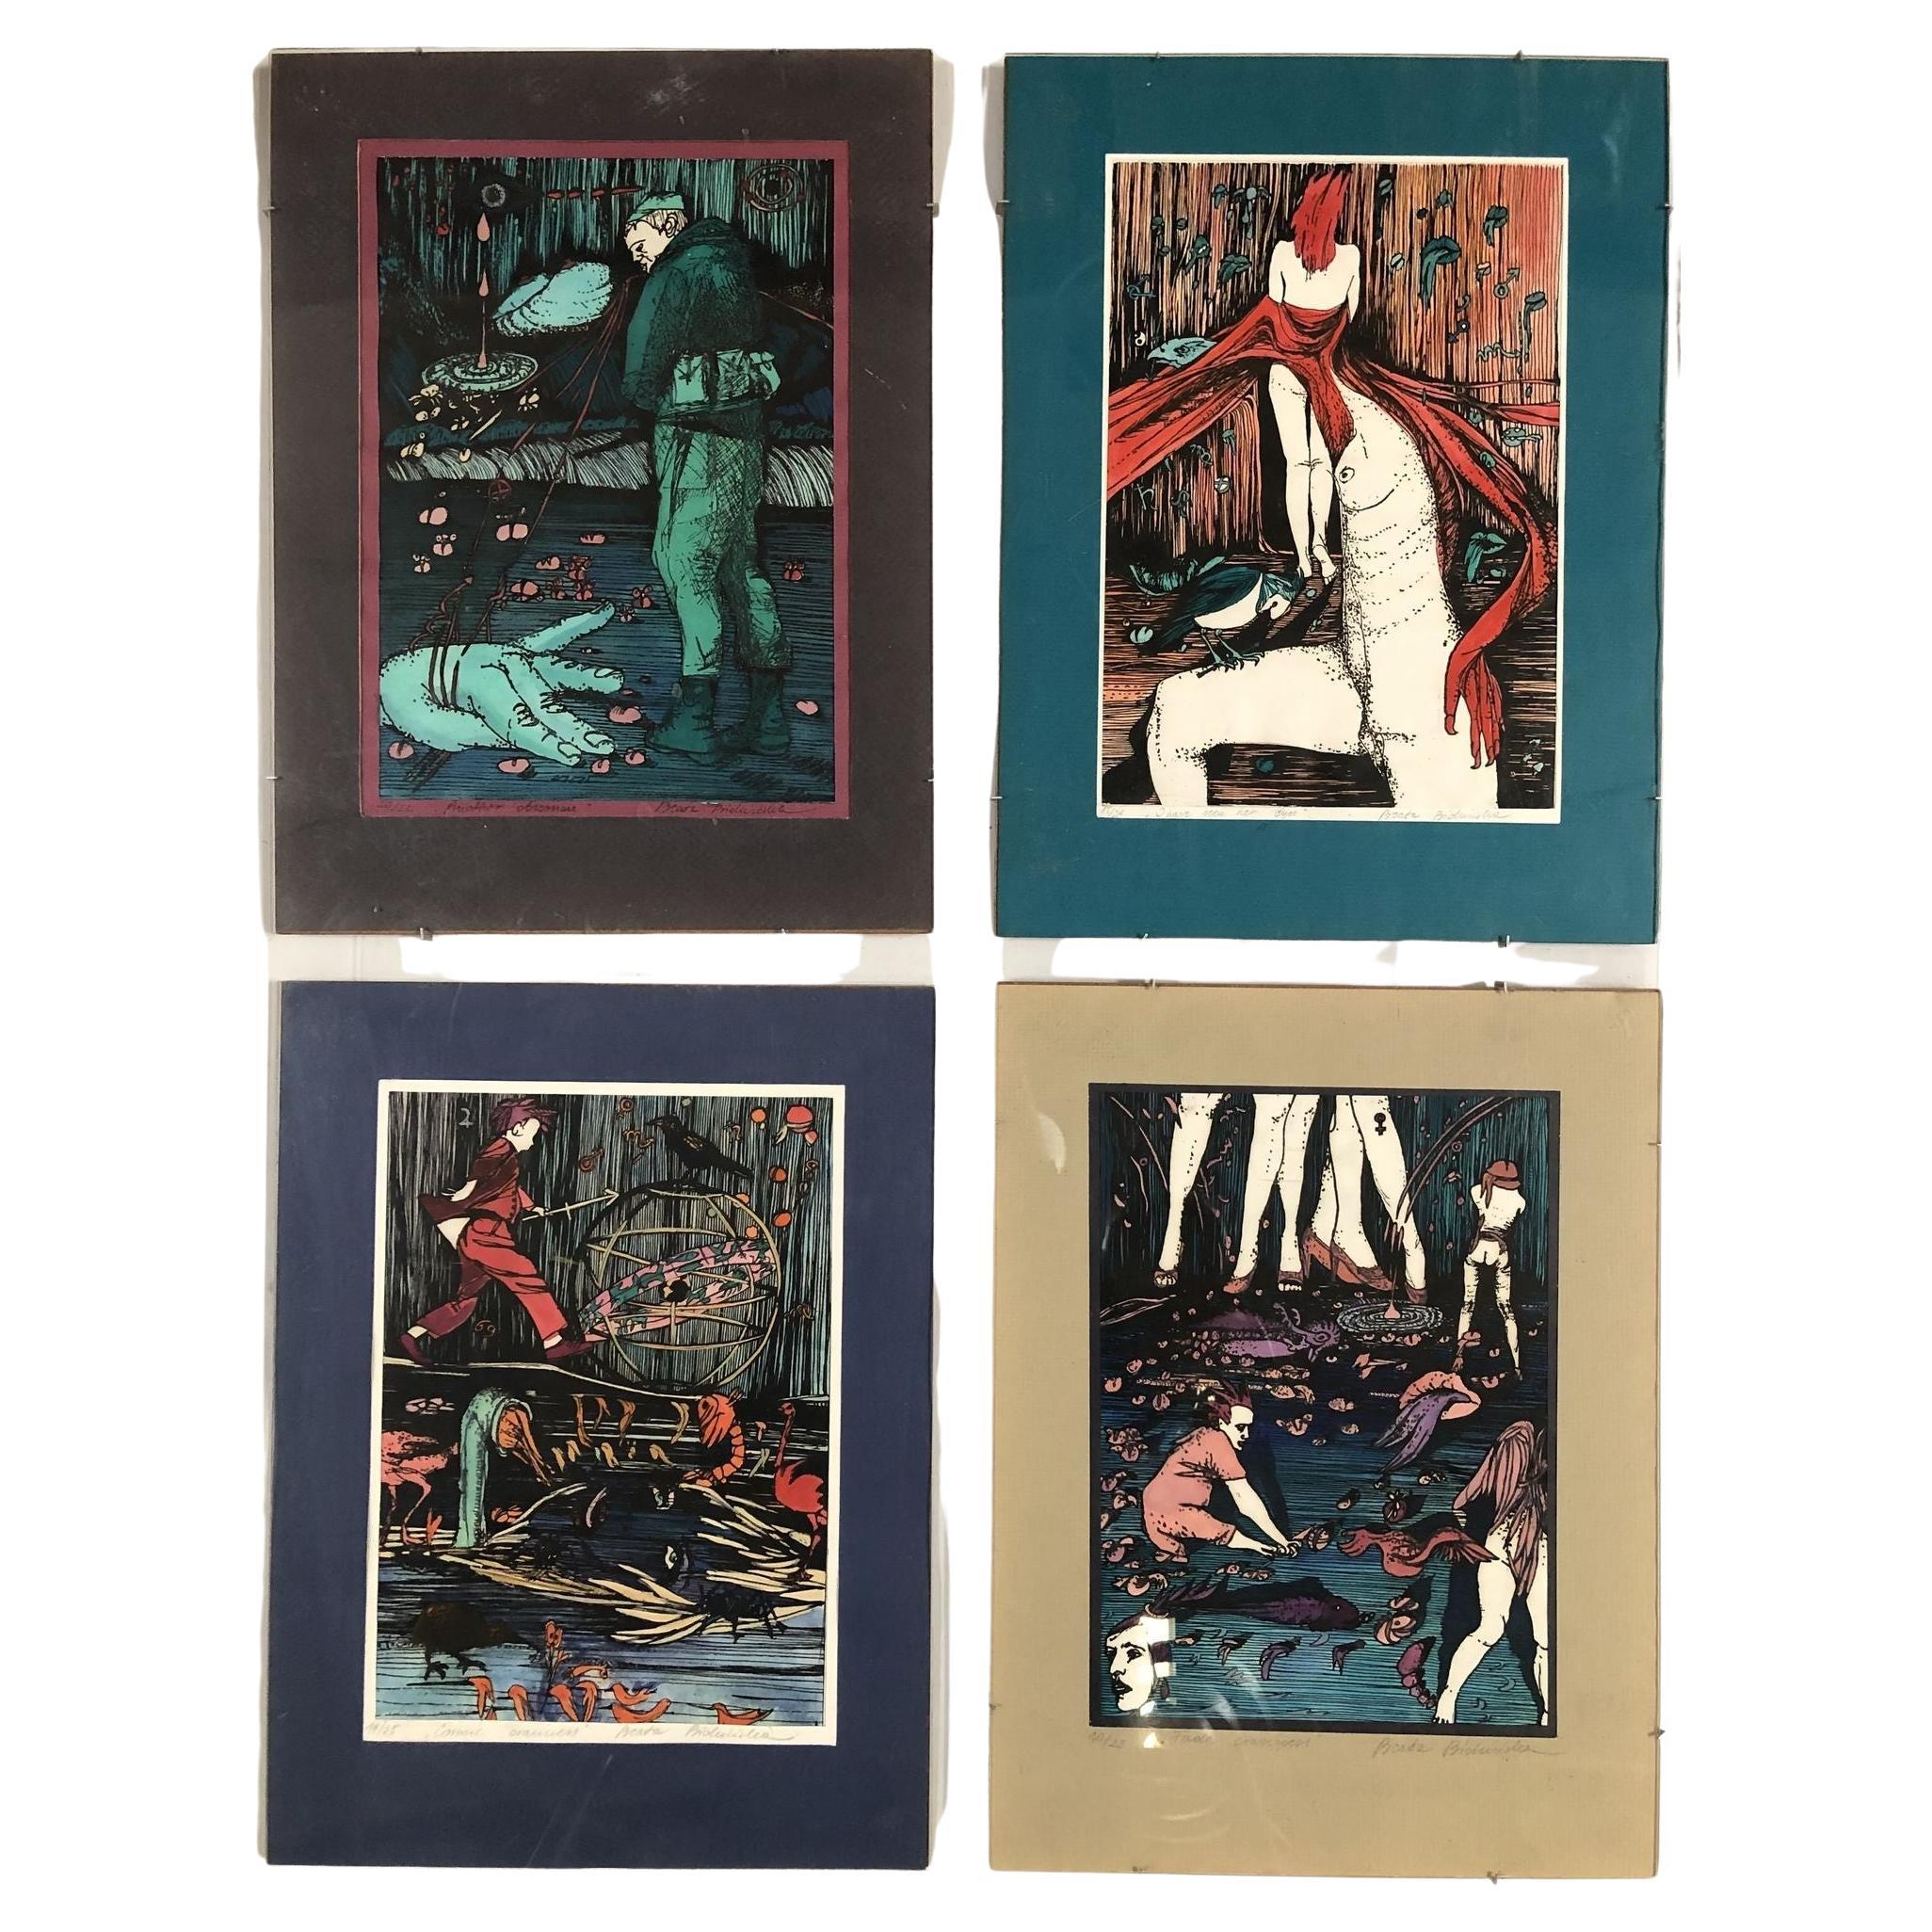 Hand-colored Abstract Block Prints in acrylic Frame by Beato P. Set of 4